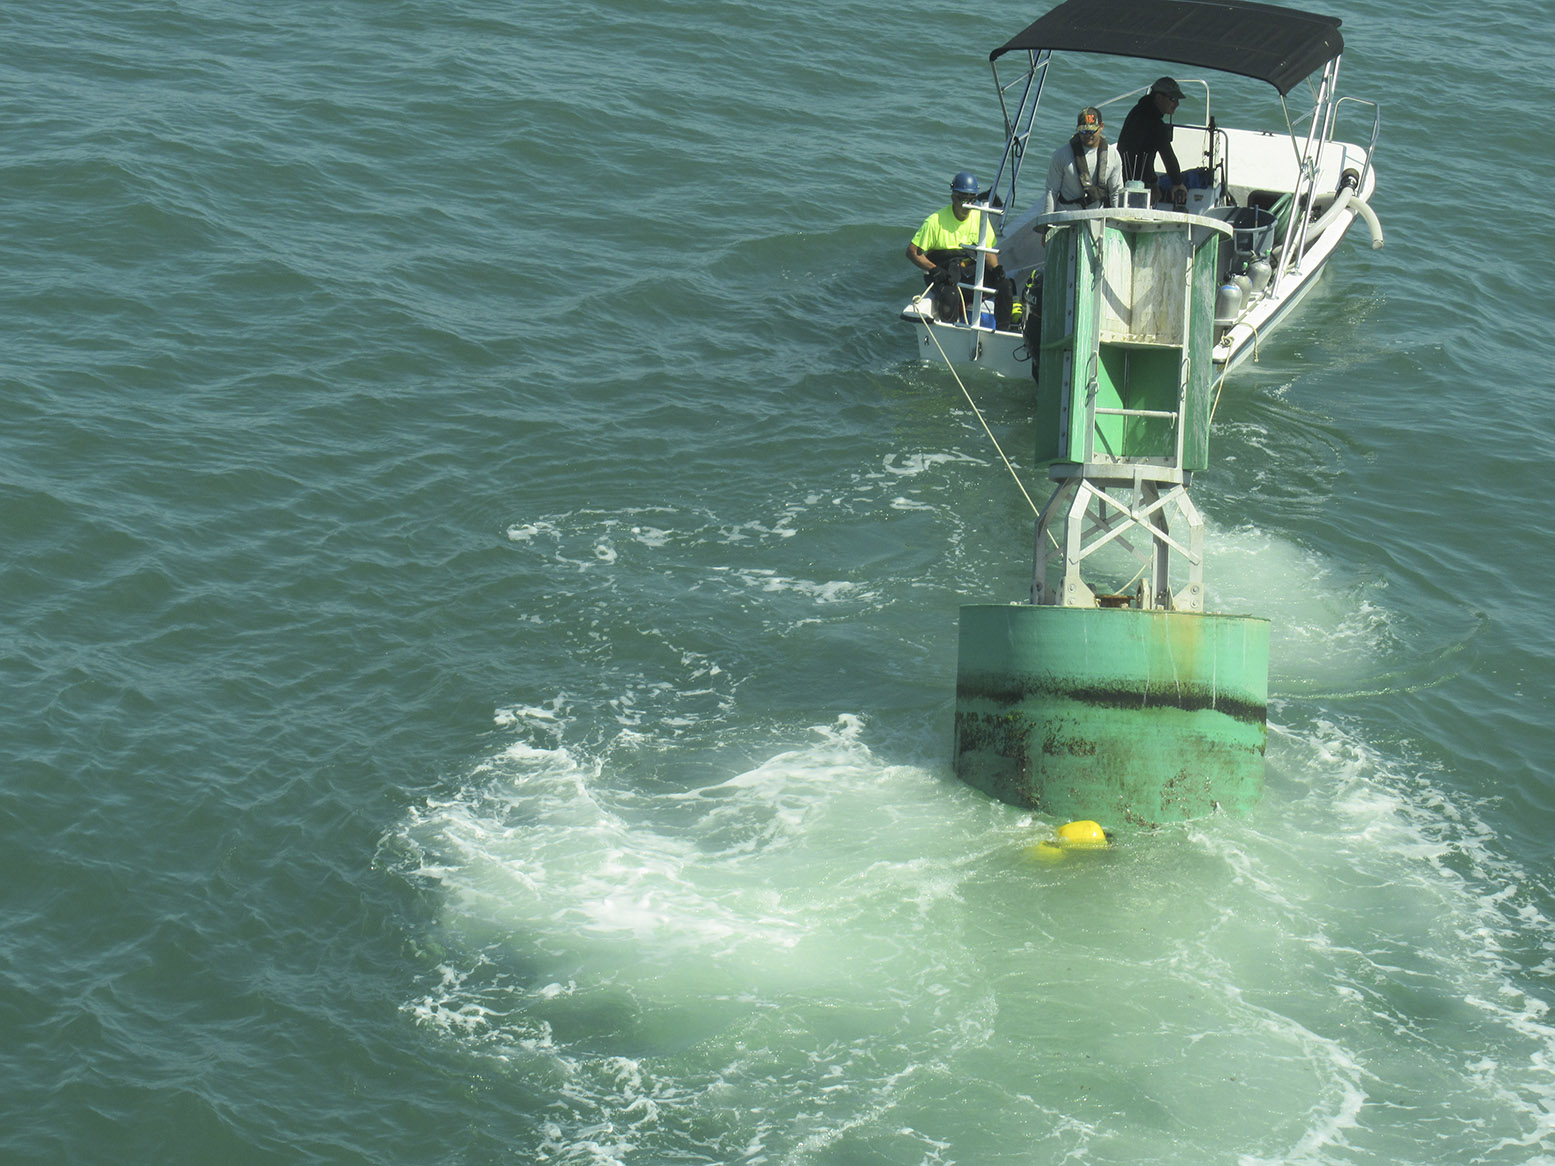 A  diver boat tows a buoy with attached eco-mooring line toward divers awaiting to fasten it to one of the anchors. (Courtesy of the U.S. Coast Guard)